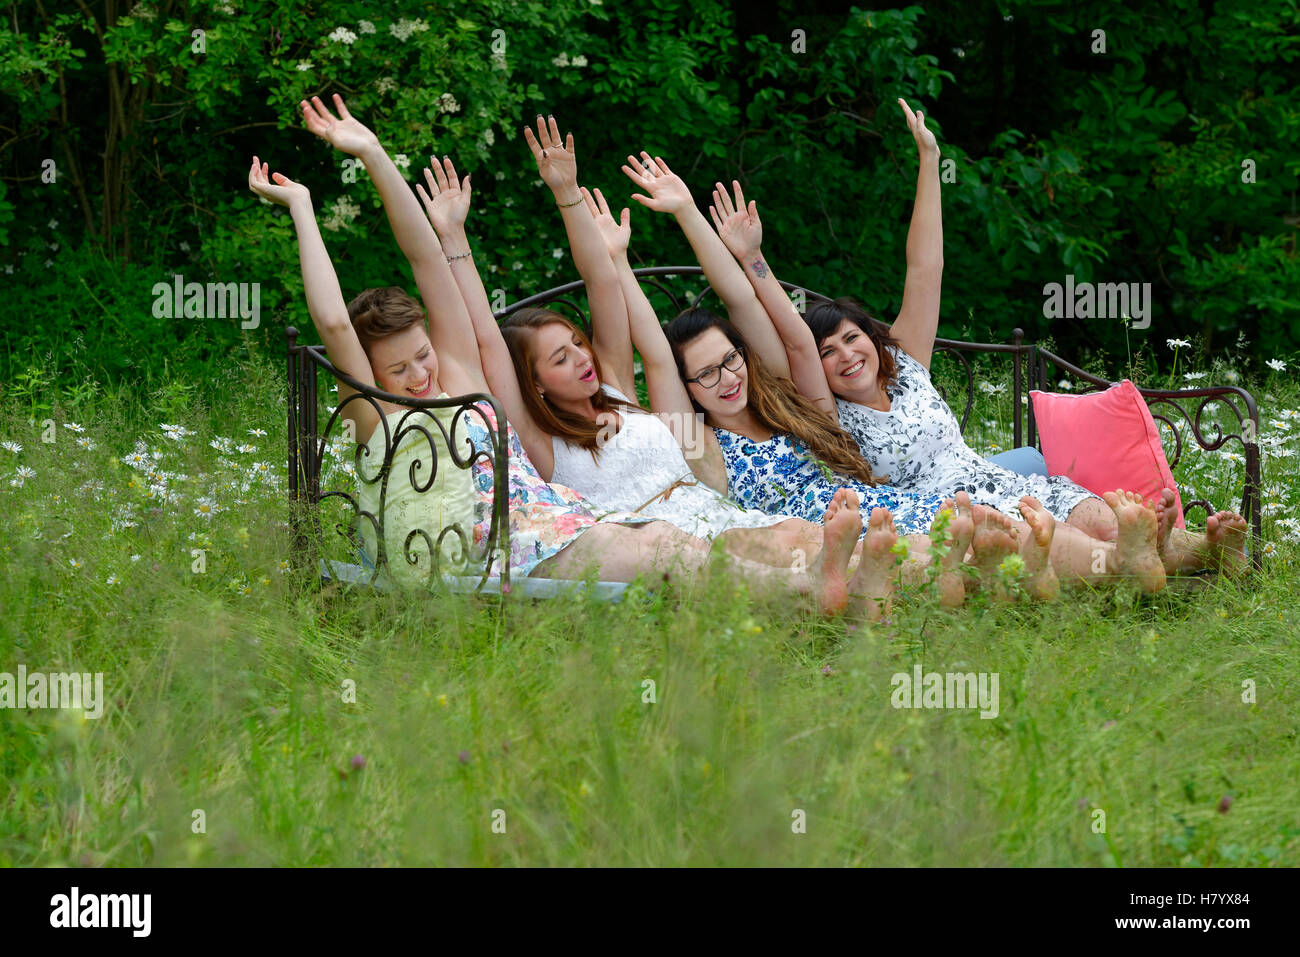 Young women sitting on sofa, posing, ludique, meadow, Upper Bavaria, Bavaria, Germany Banque D'Images